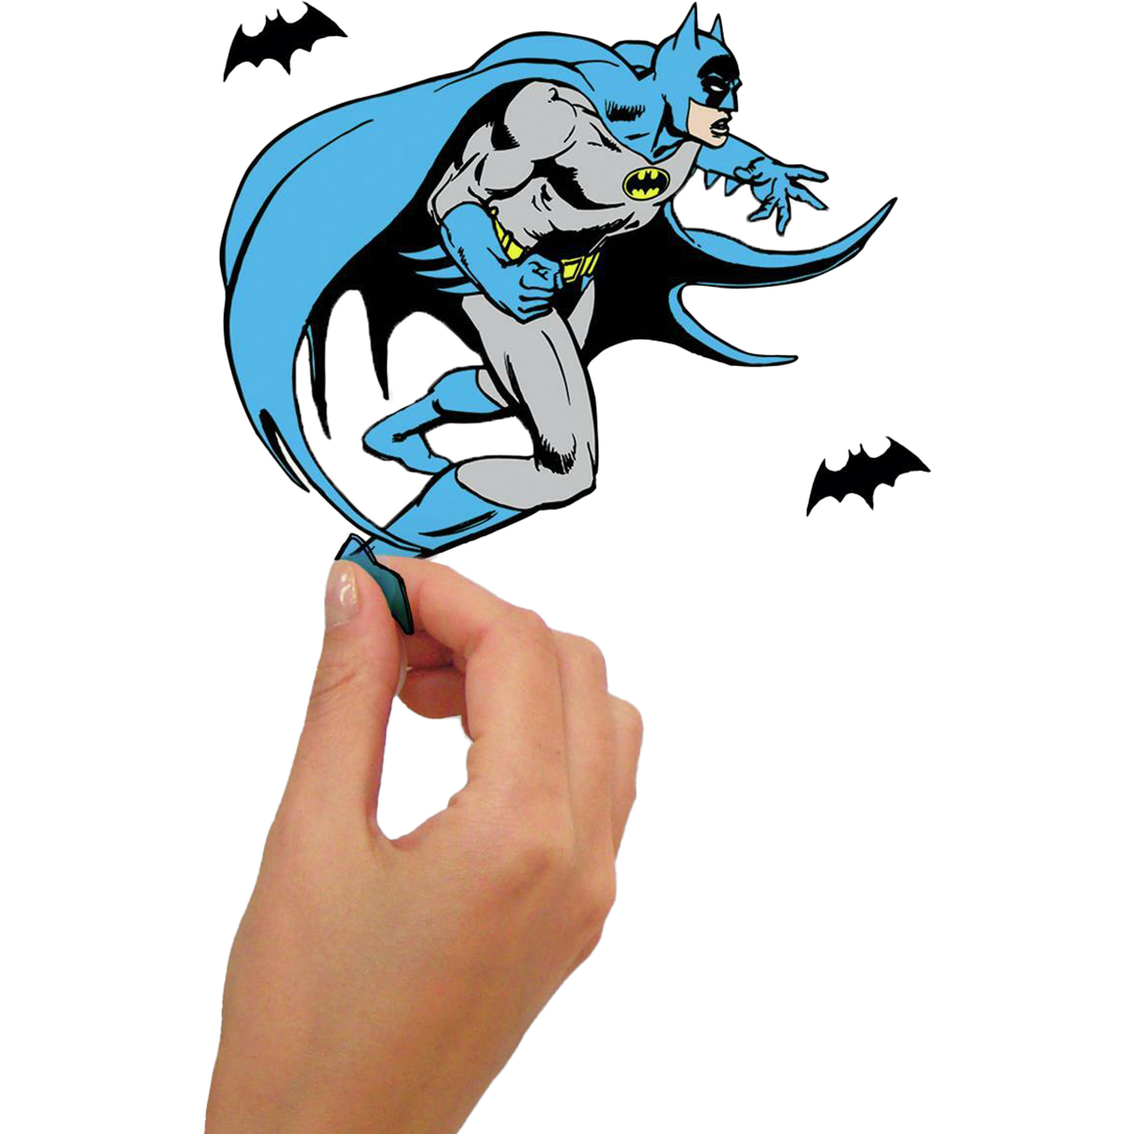 Roommates Batman Villains Peel and Stick Wall Decals - Image 4 of 5